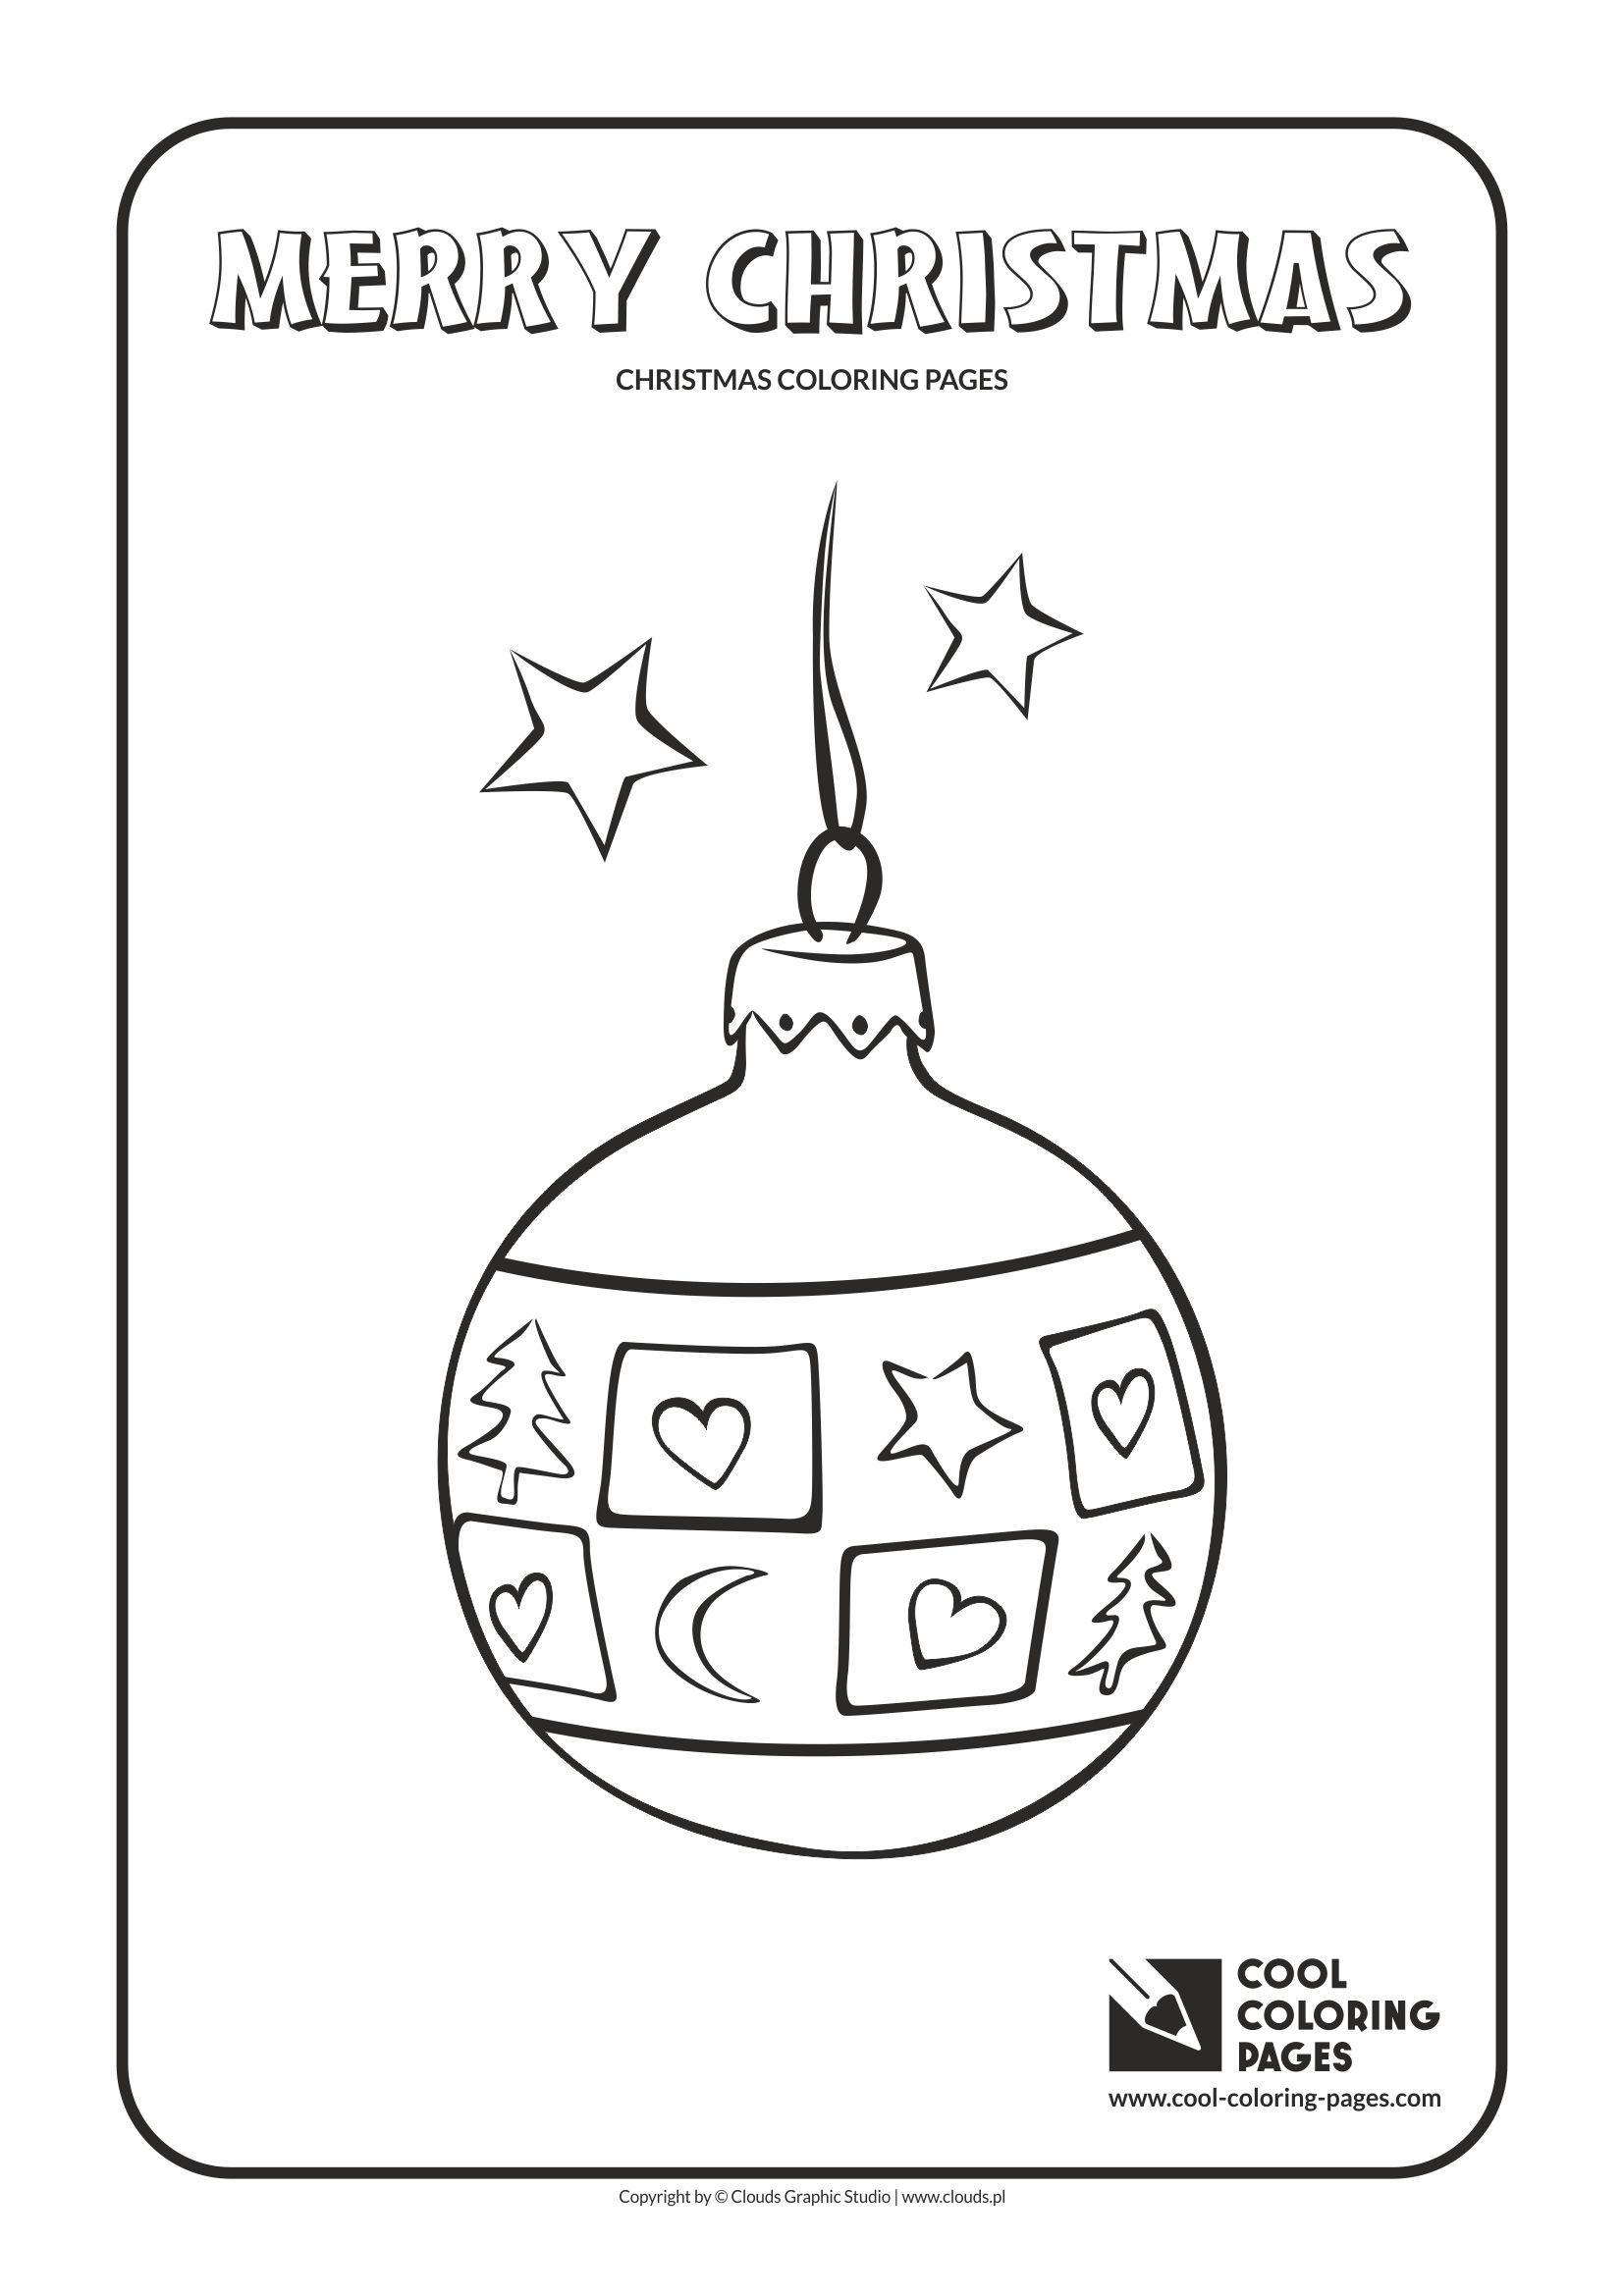 Cool Coloring Pages - Holidays / Christmas glass ball no 1 / Coloring page with Christmas glass ball no 1